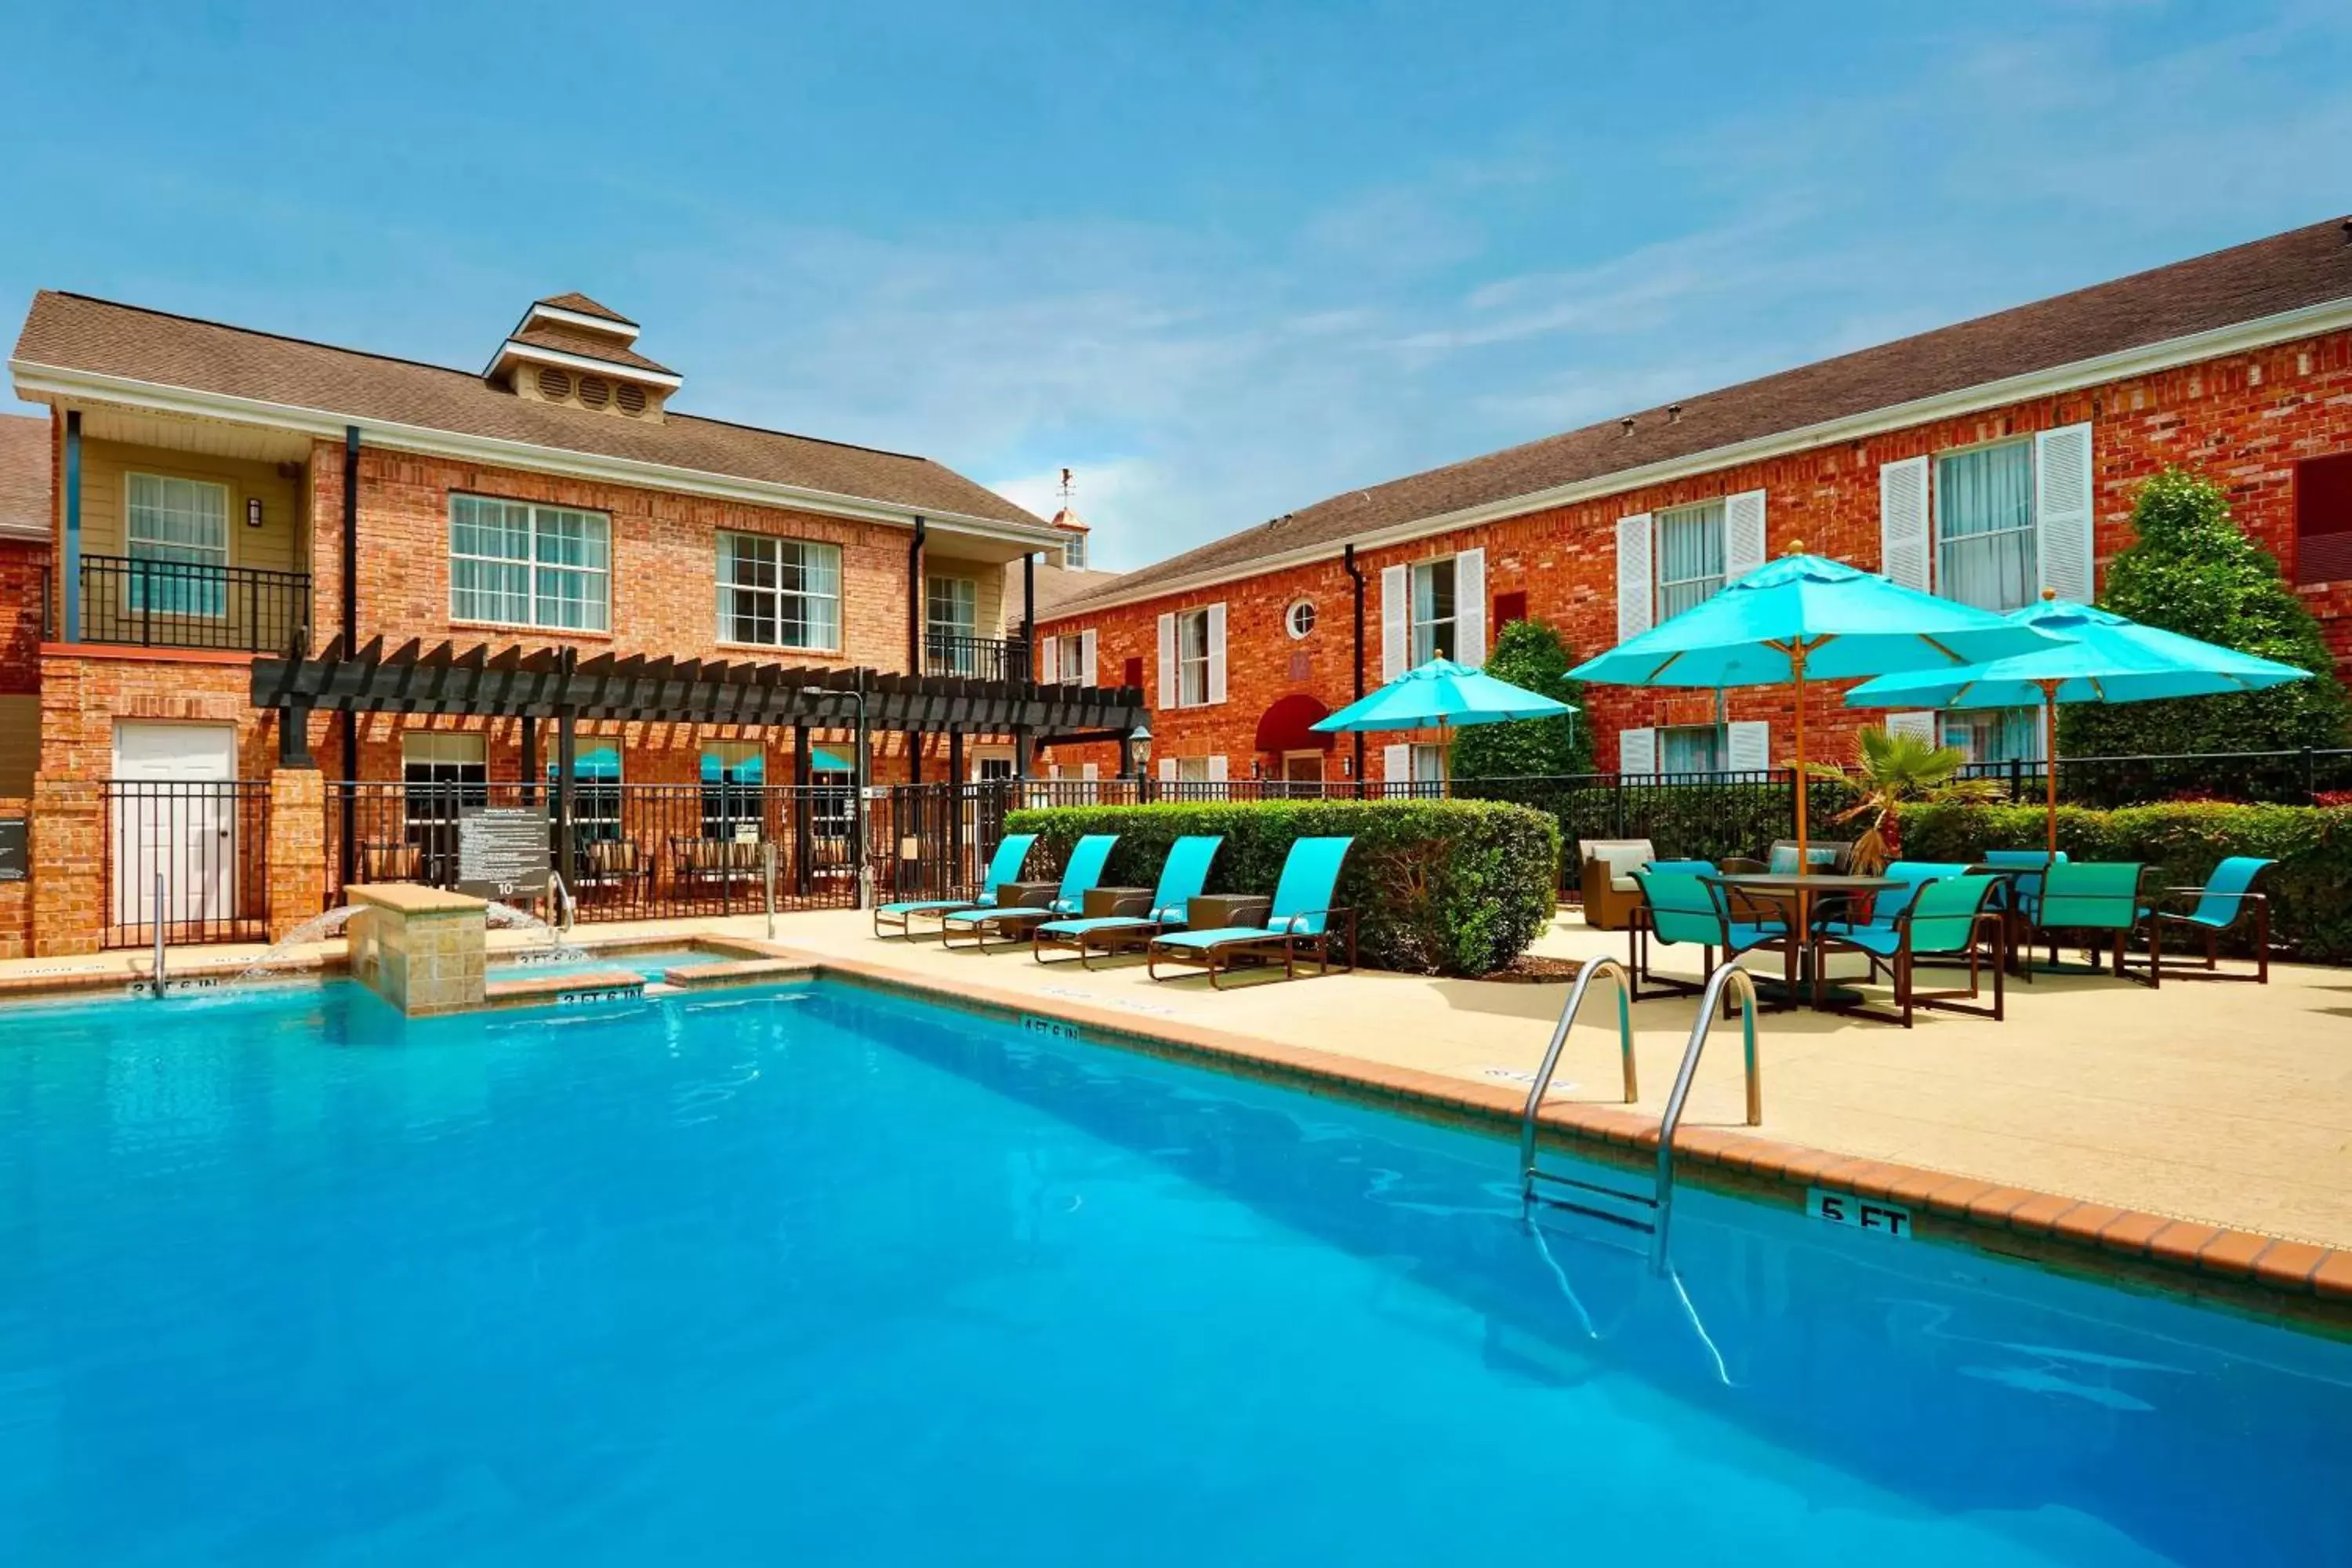 Swimming Pool in Residence Inn Houston by The Galleria